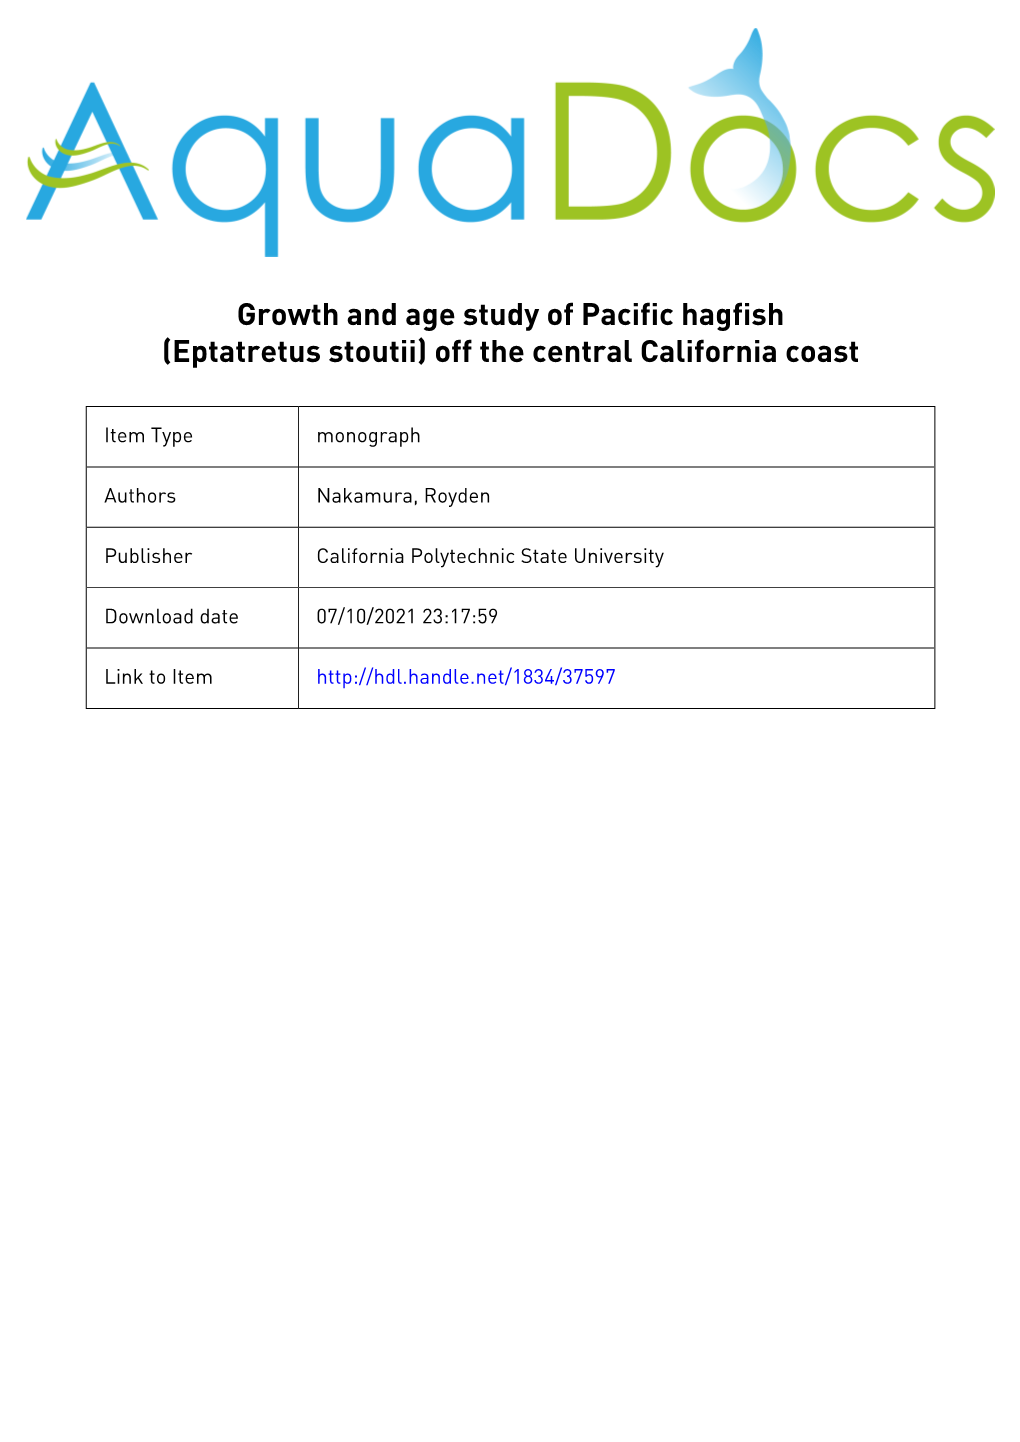 Growth and Age Study of Pacific Hagfish (Eptatretus Stoutii) Off the Central California Coast